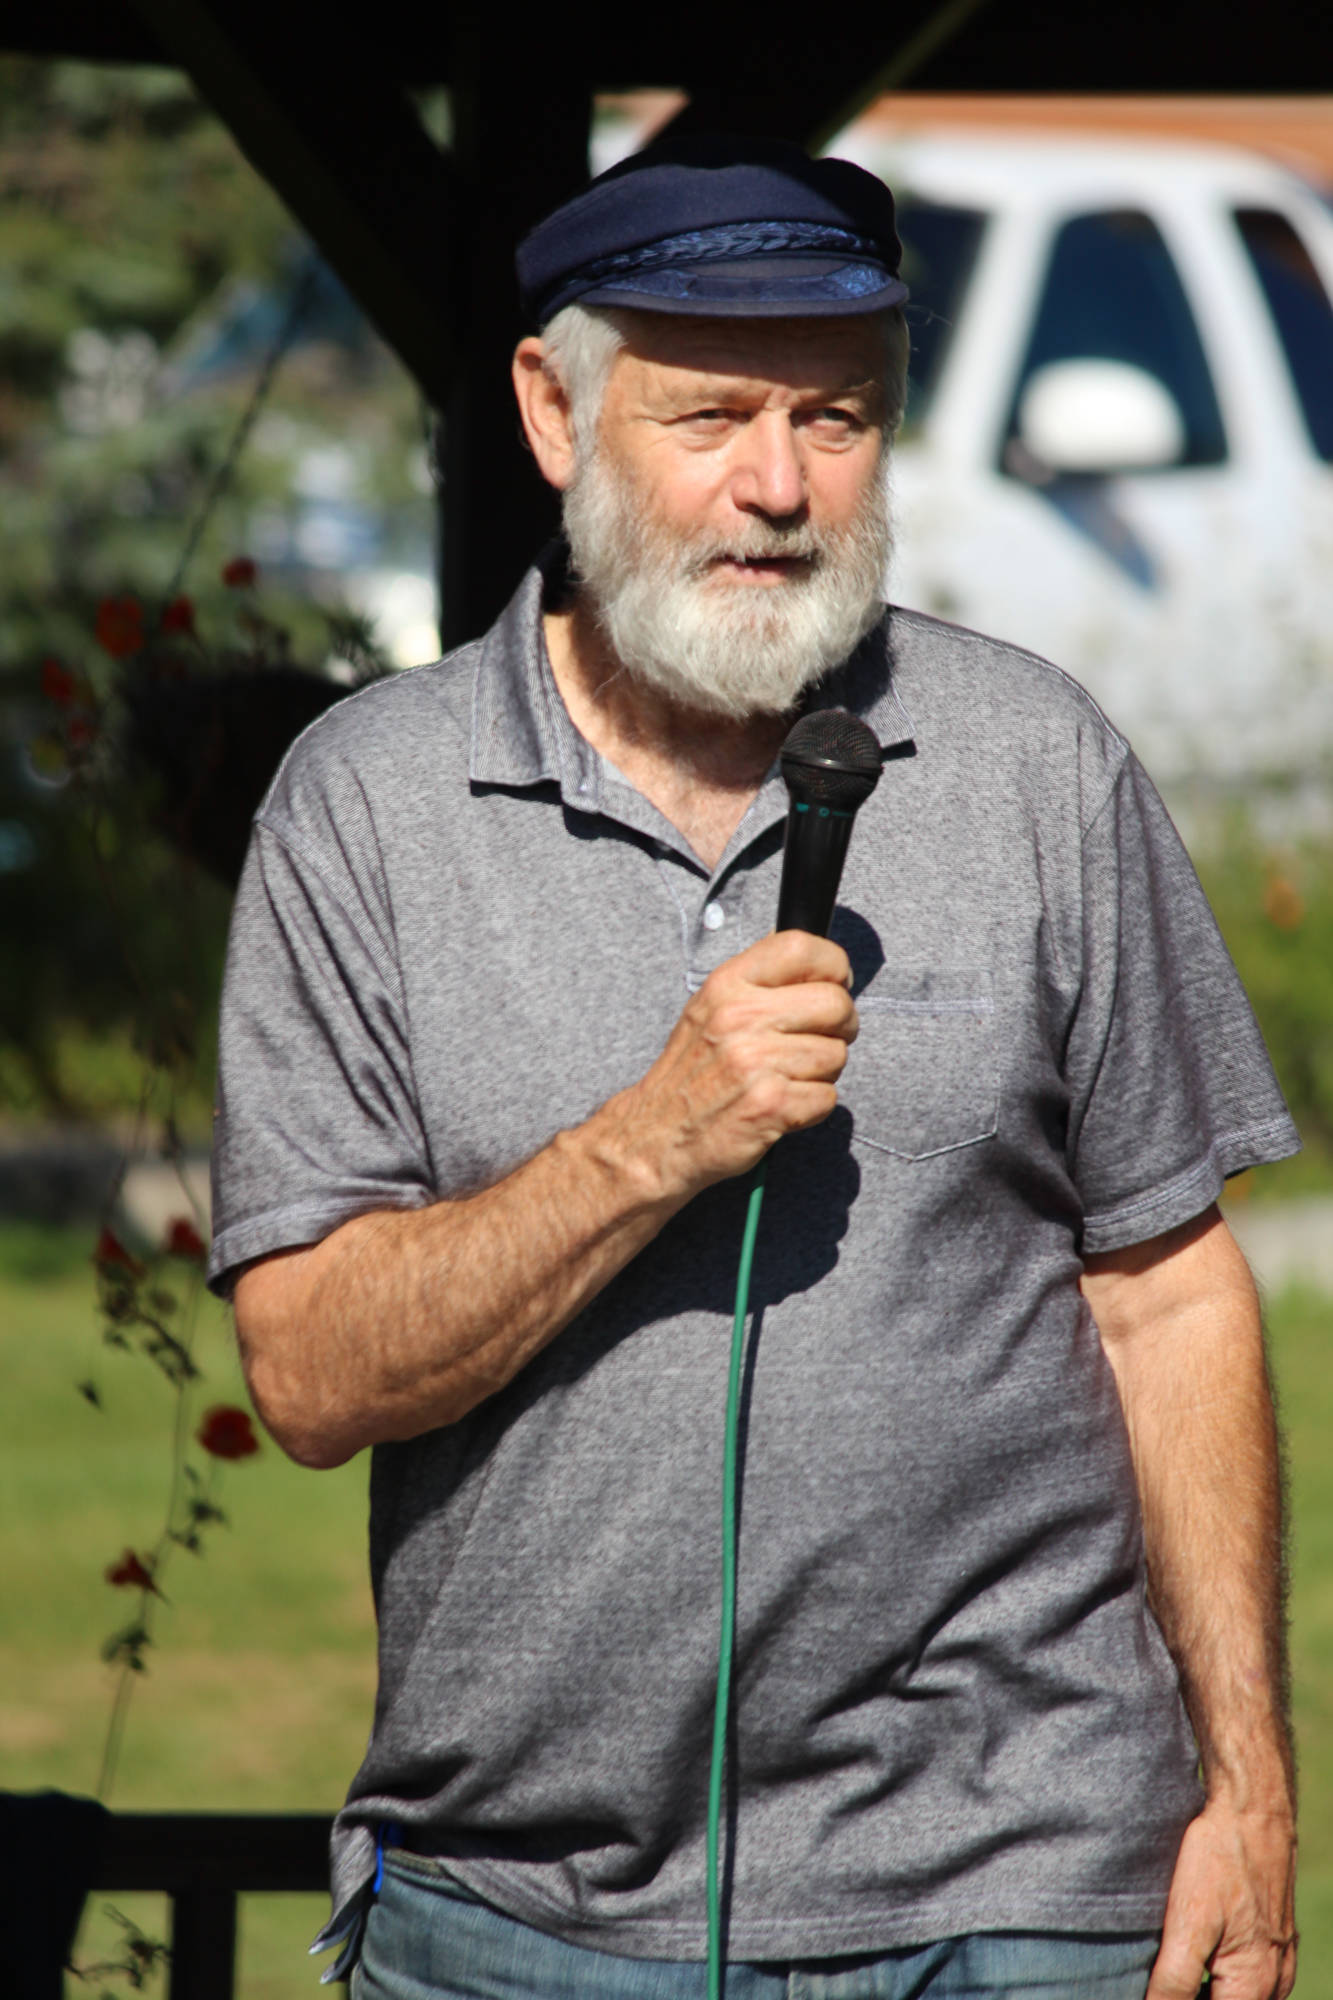 Rep. Paul Seaton speaks at the Rise for Climate, Jobs and Justice rally and march Saturday, Sept. 8, 2018 at WKFL Park in Homer, Alaska. (Photo by Megan Pacer/Homer News)